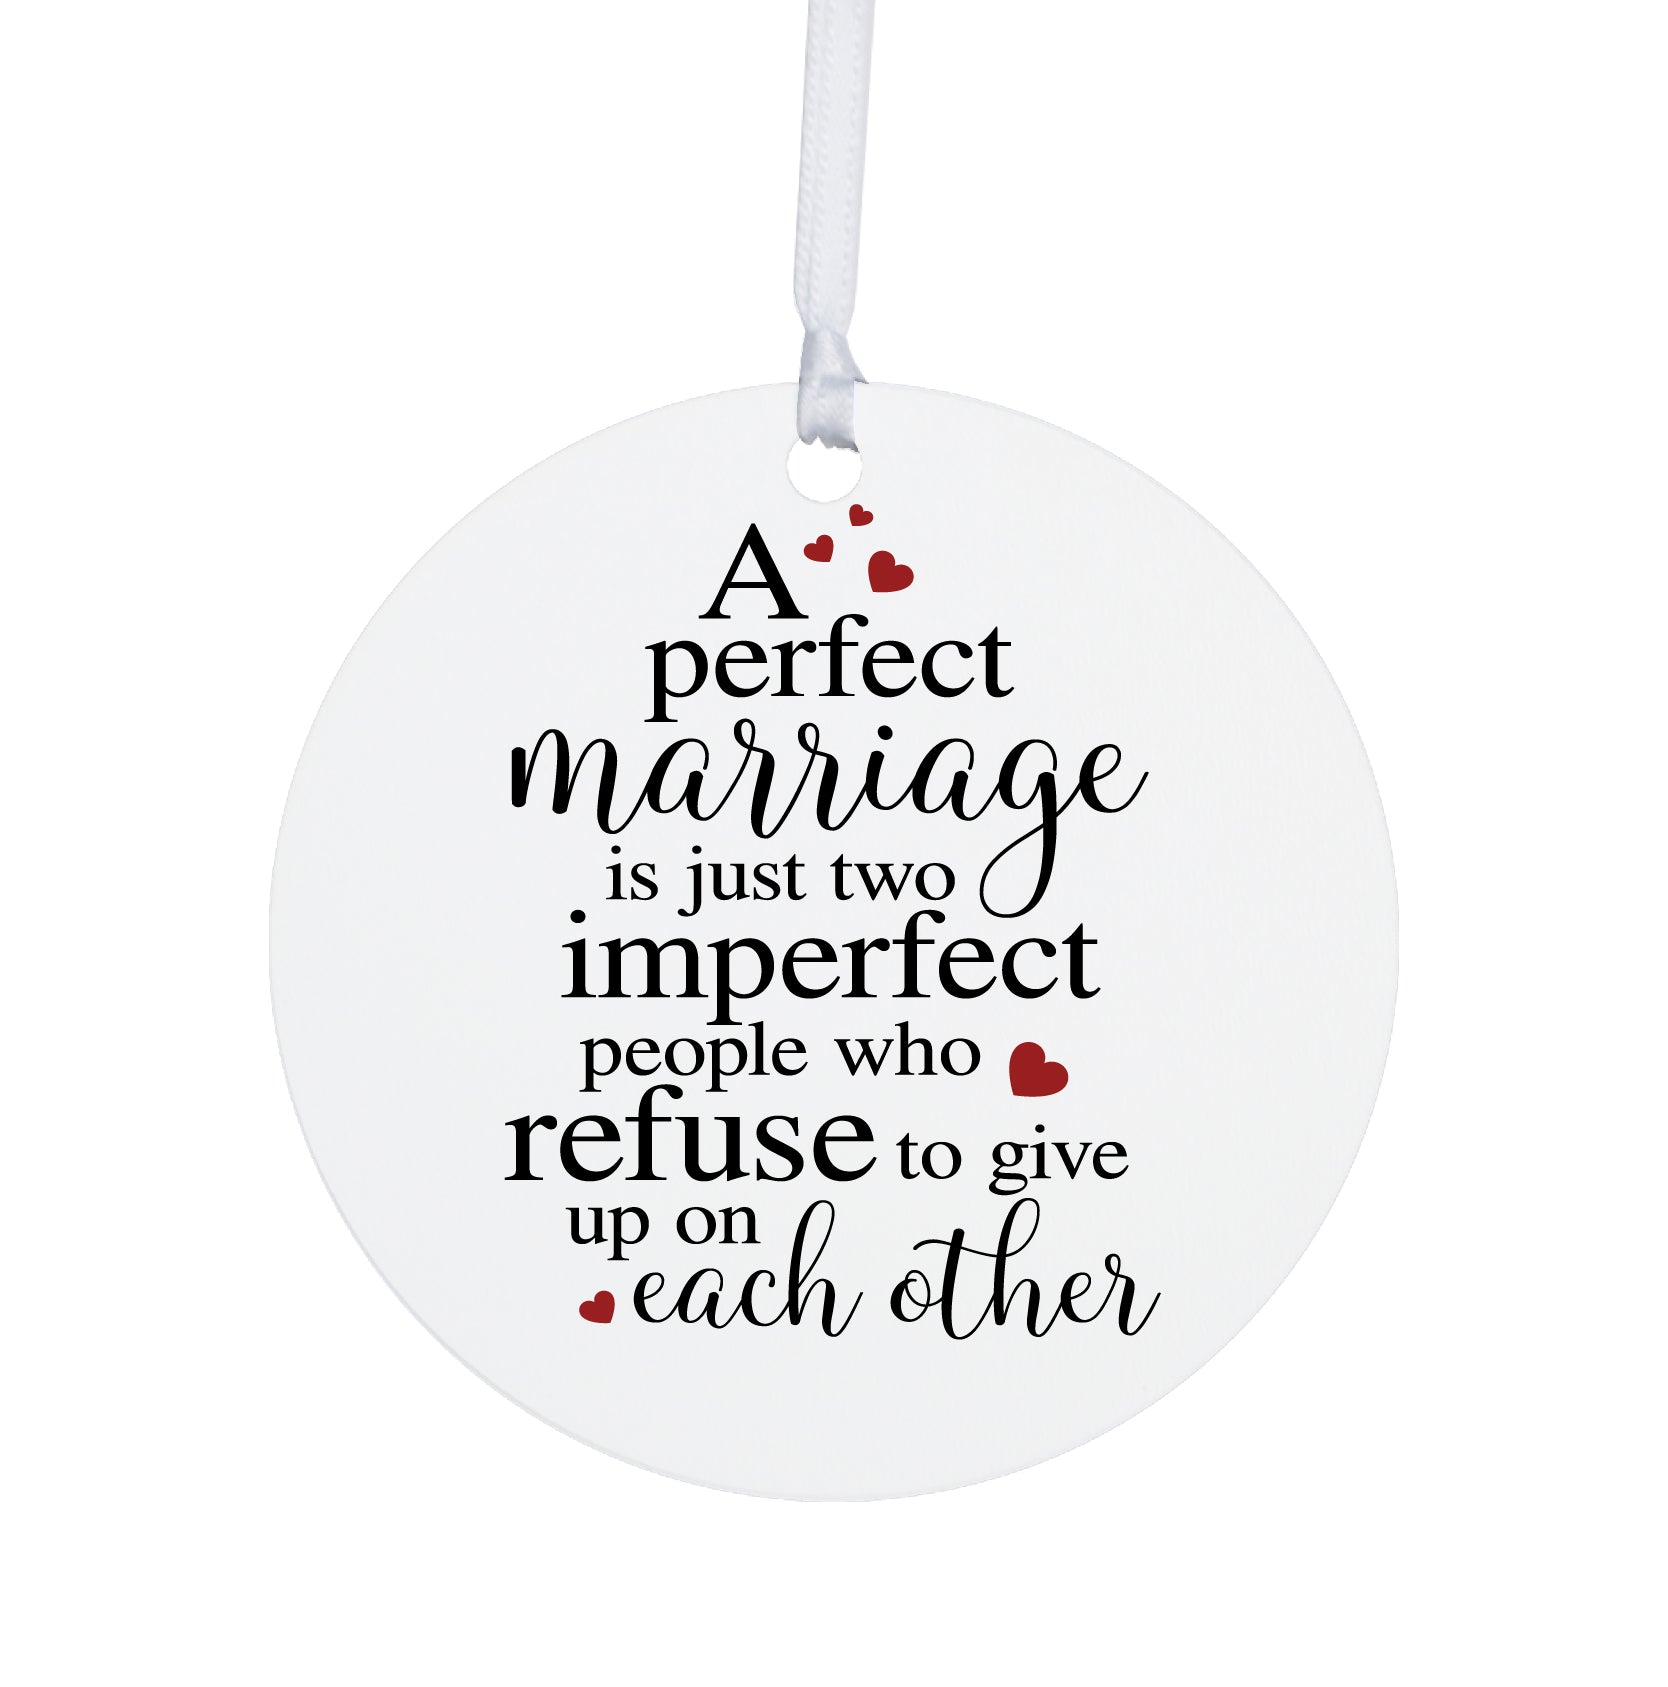 A Perfect Marriage Wedding Anniversary White Ornament With Inspirational Message Gift Ideas